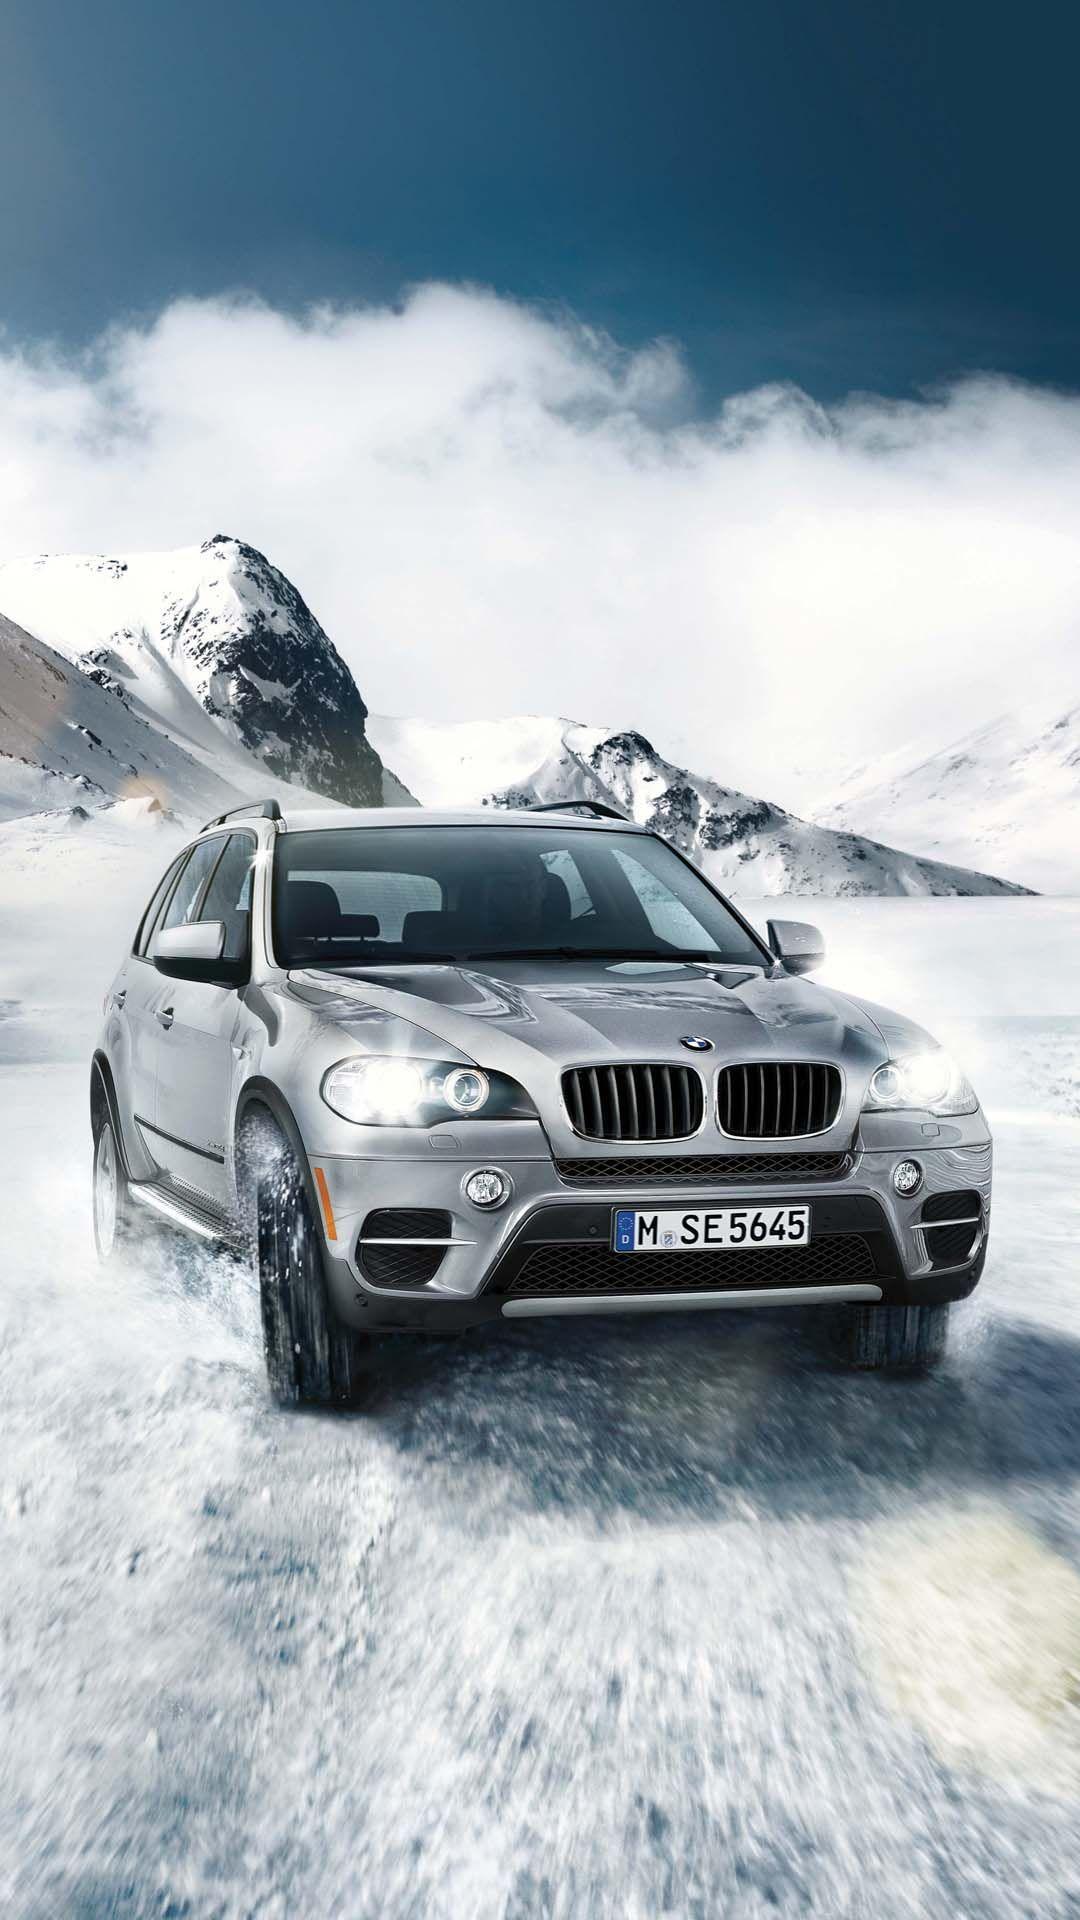 BMW X5 htc one wallpaper htc one wallpaper, free and easy